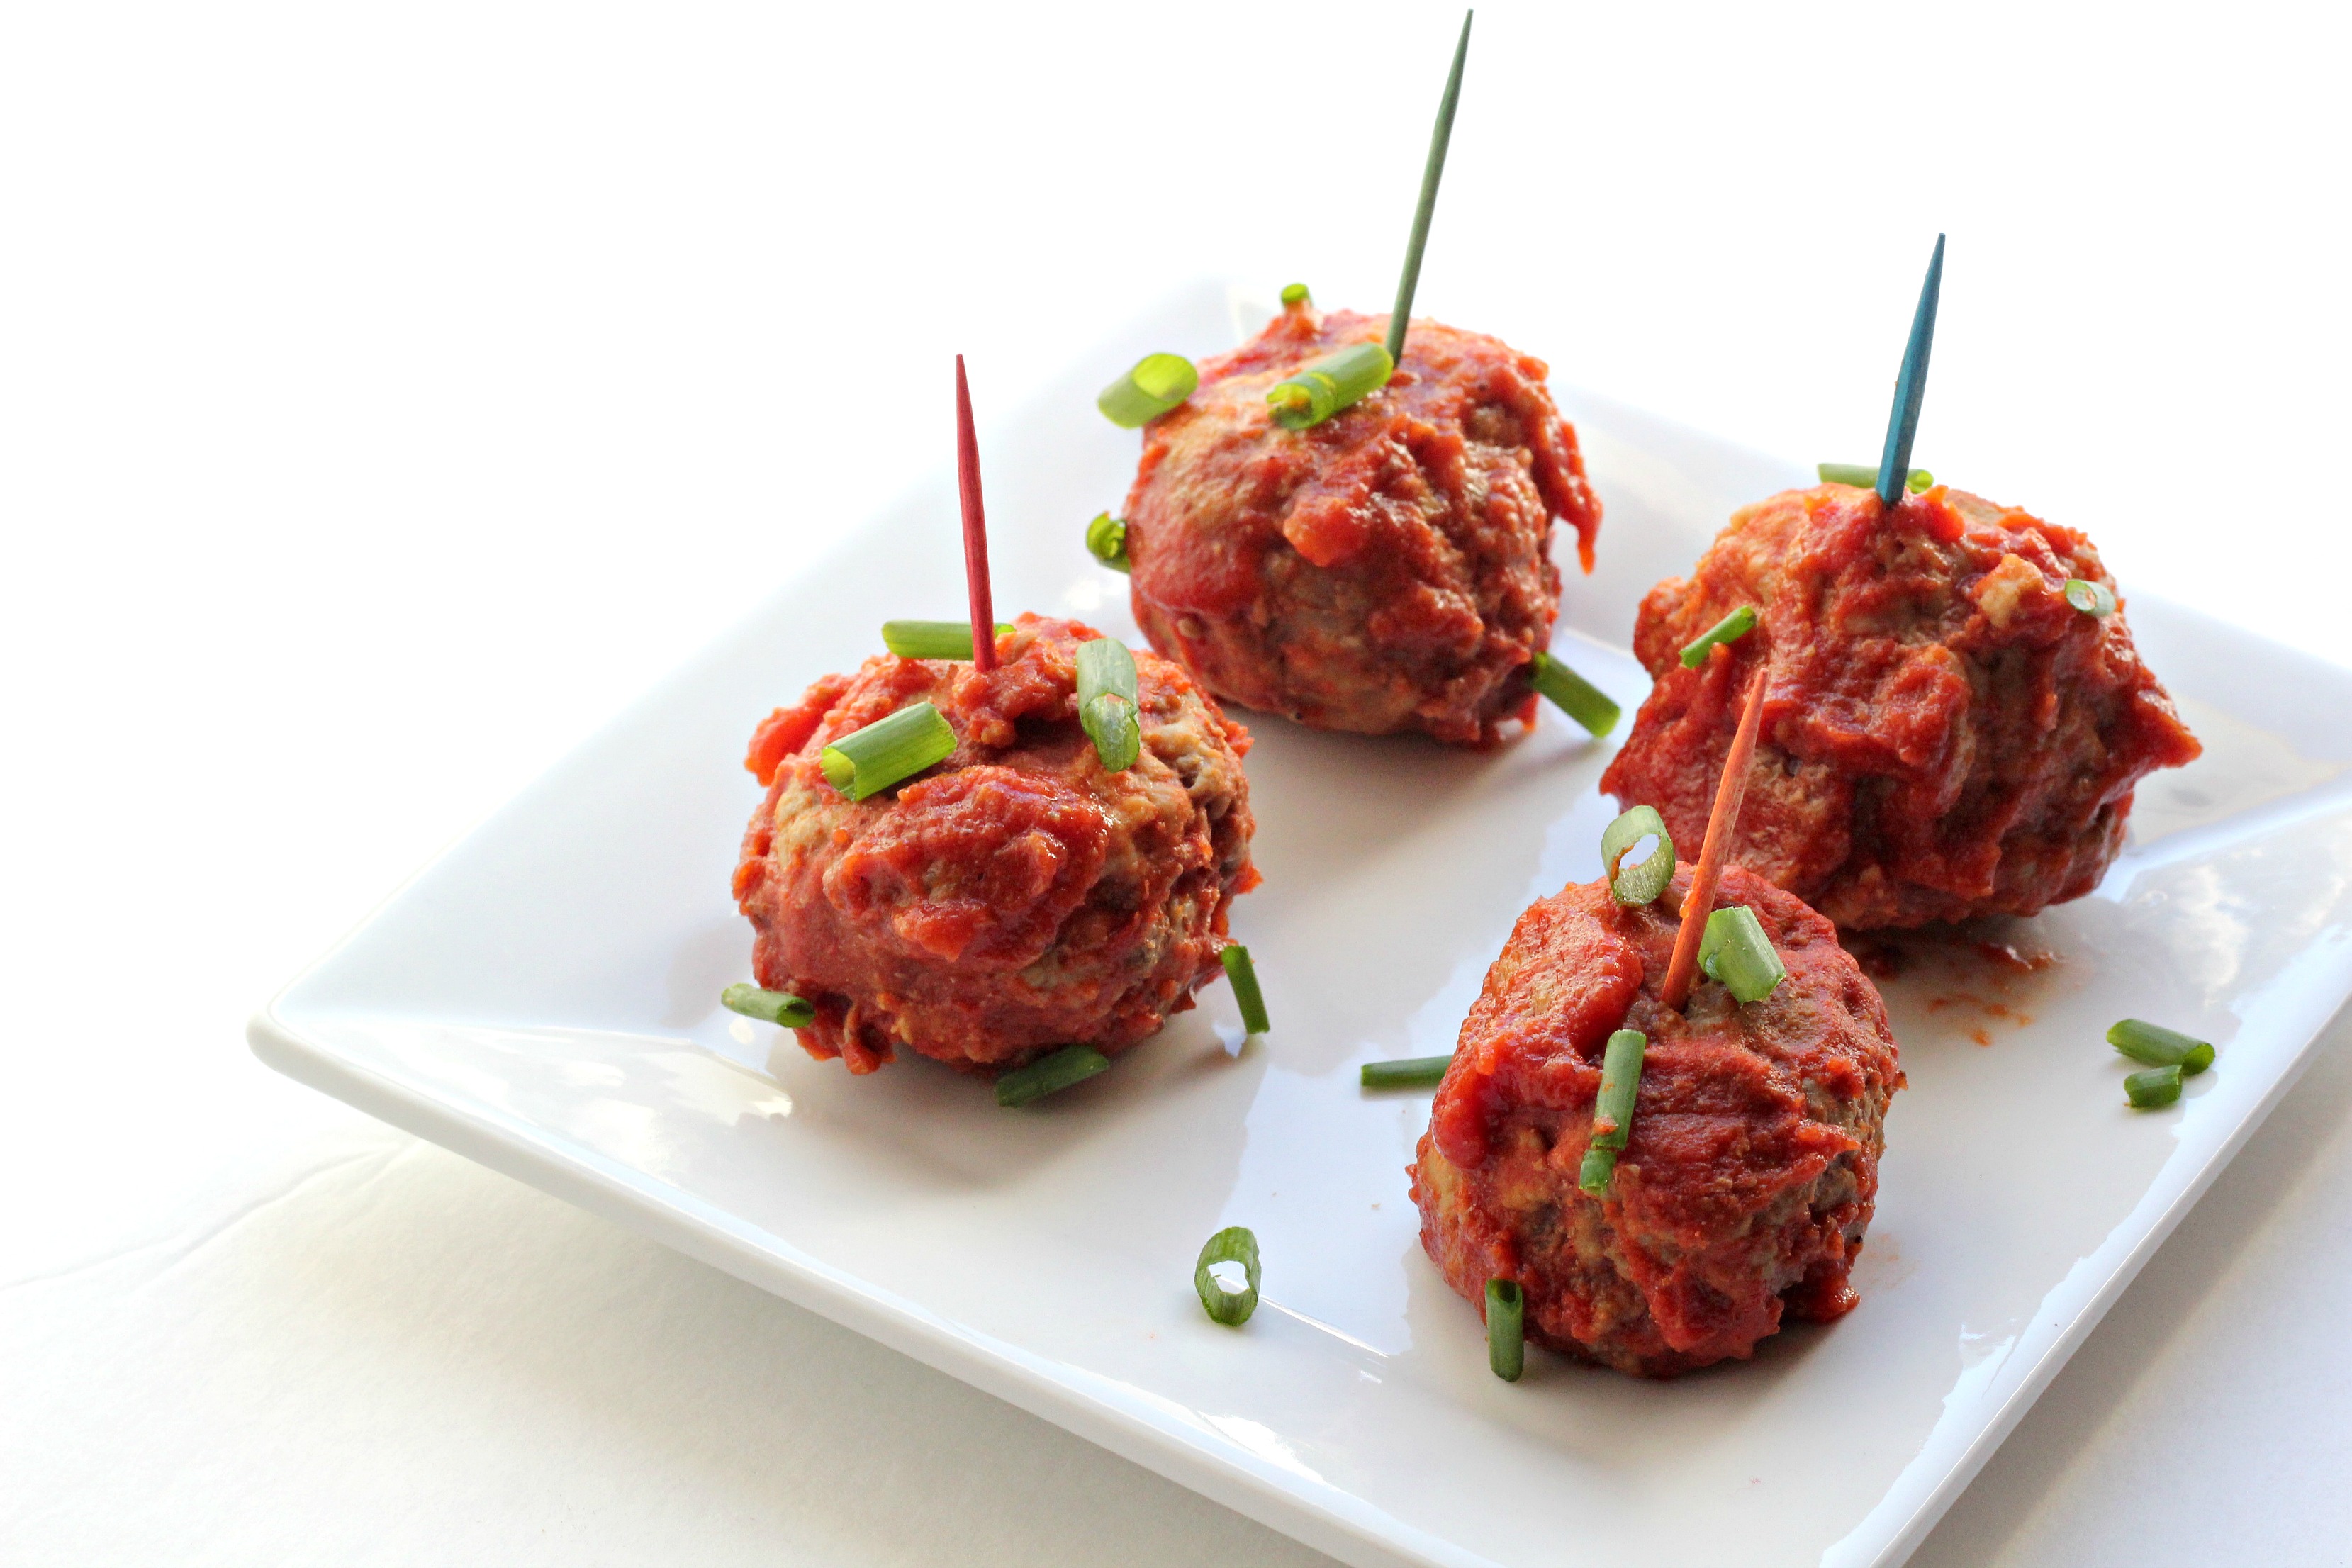 Honey Chipotle Meatballs are the perfect appetizer or dinner. They are super flavorful and incredibly easy to make.